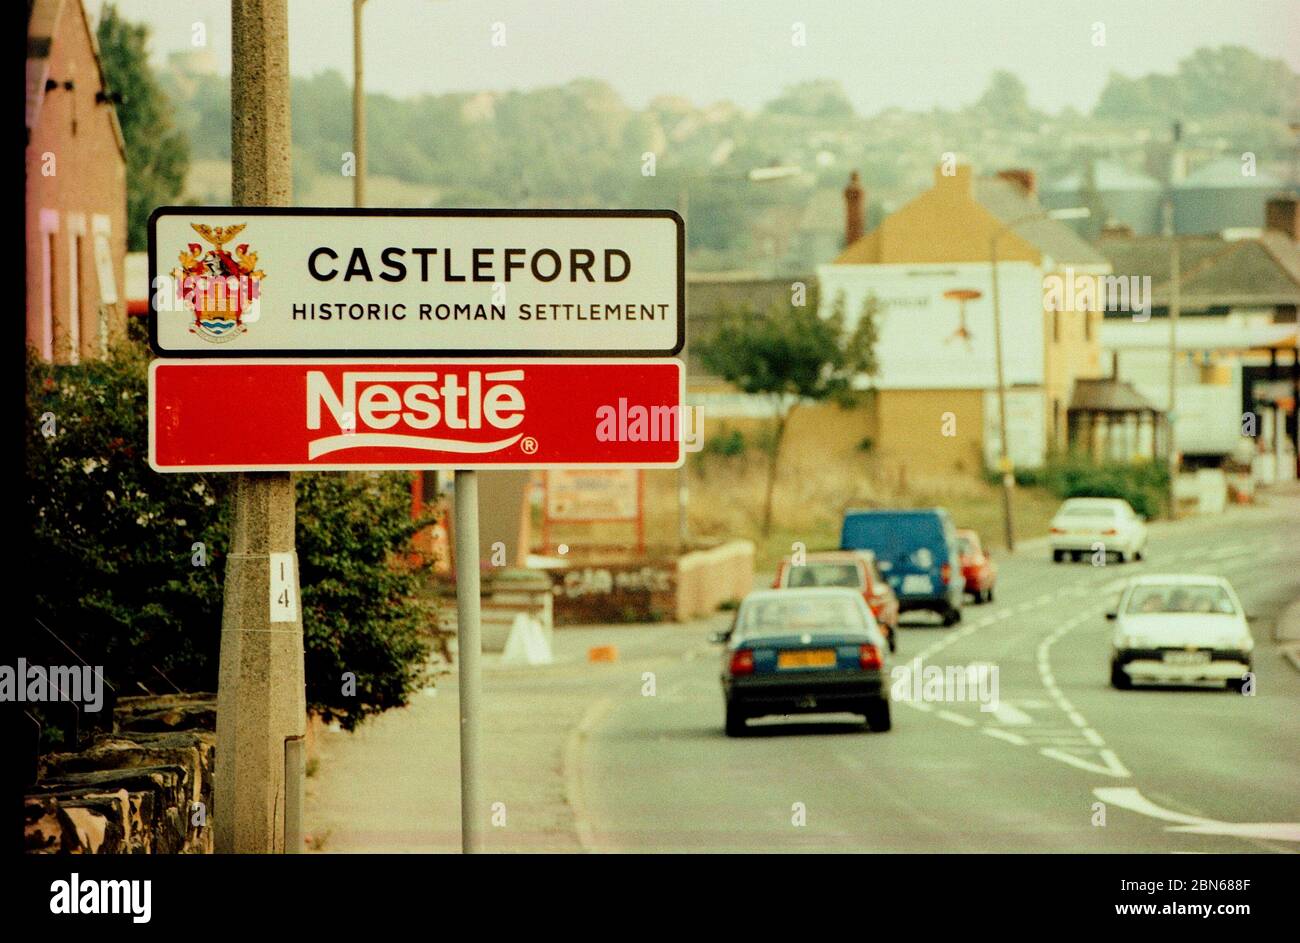 Road sign for Castleford, west Yorkshire, northern England, in 1997, shot on film & cross processed Stock Photo